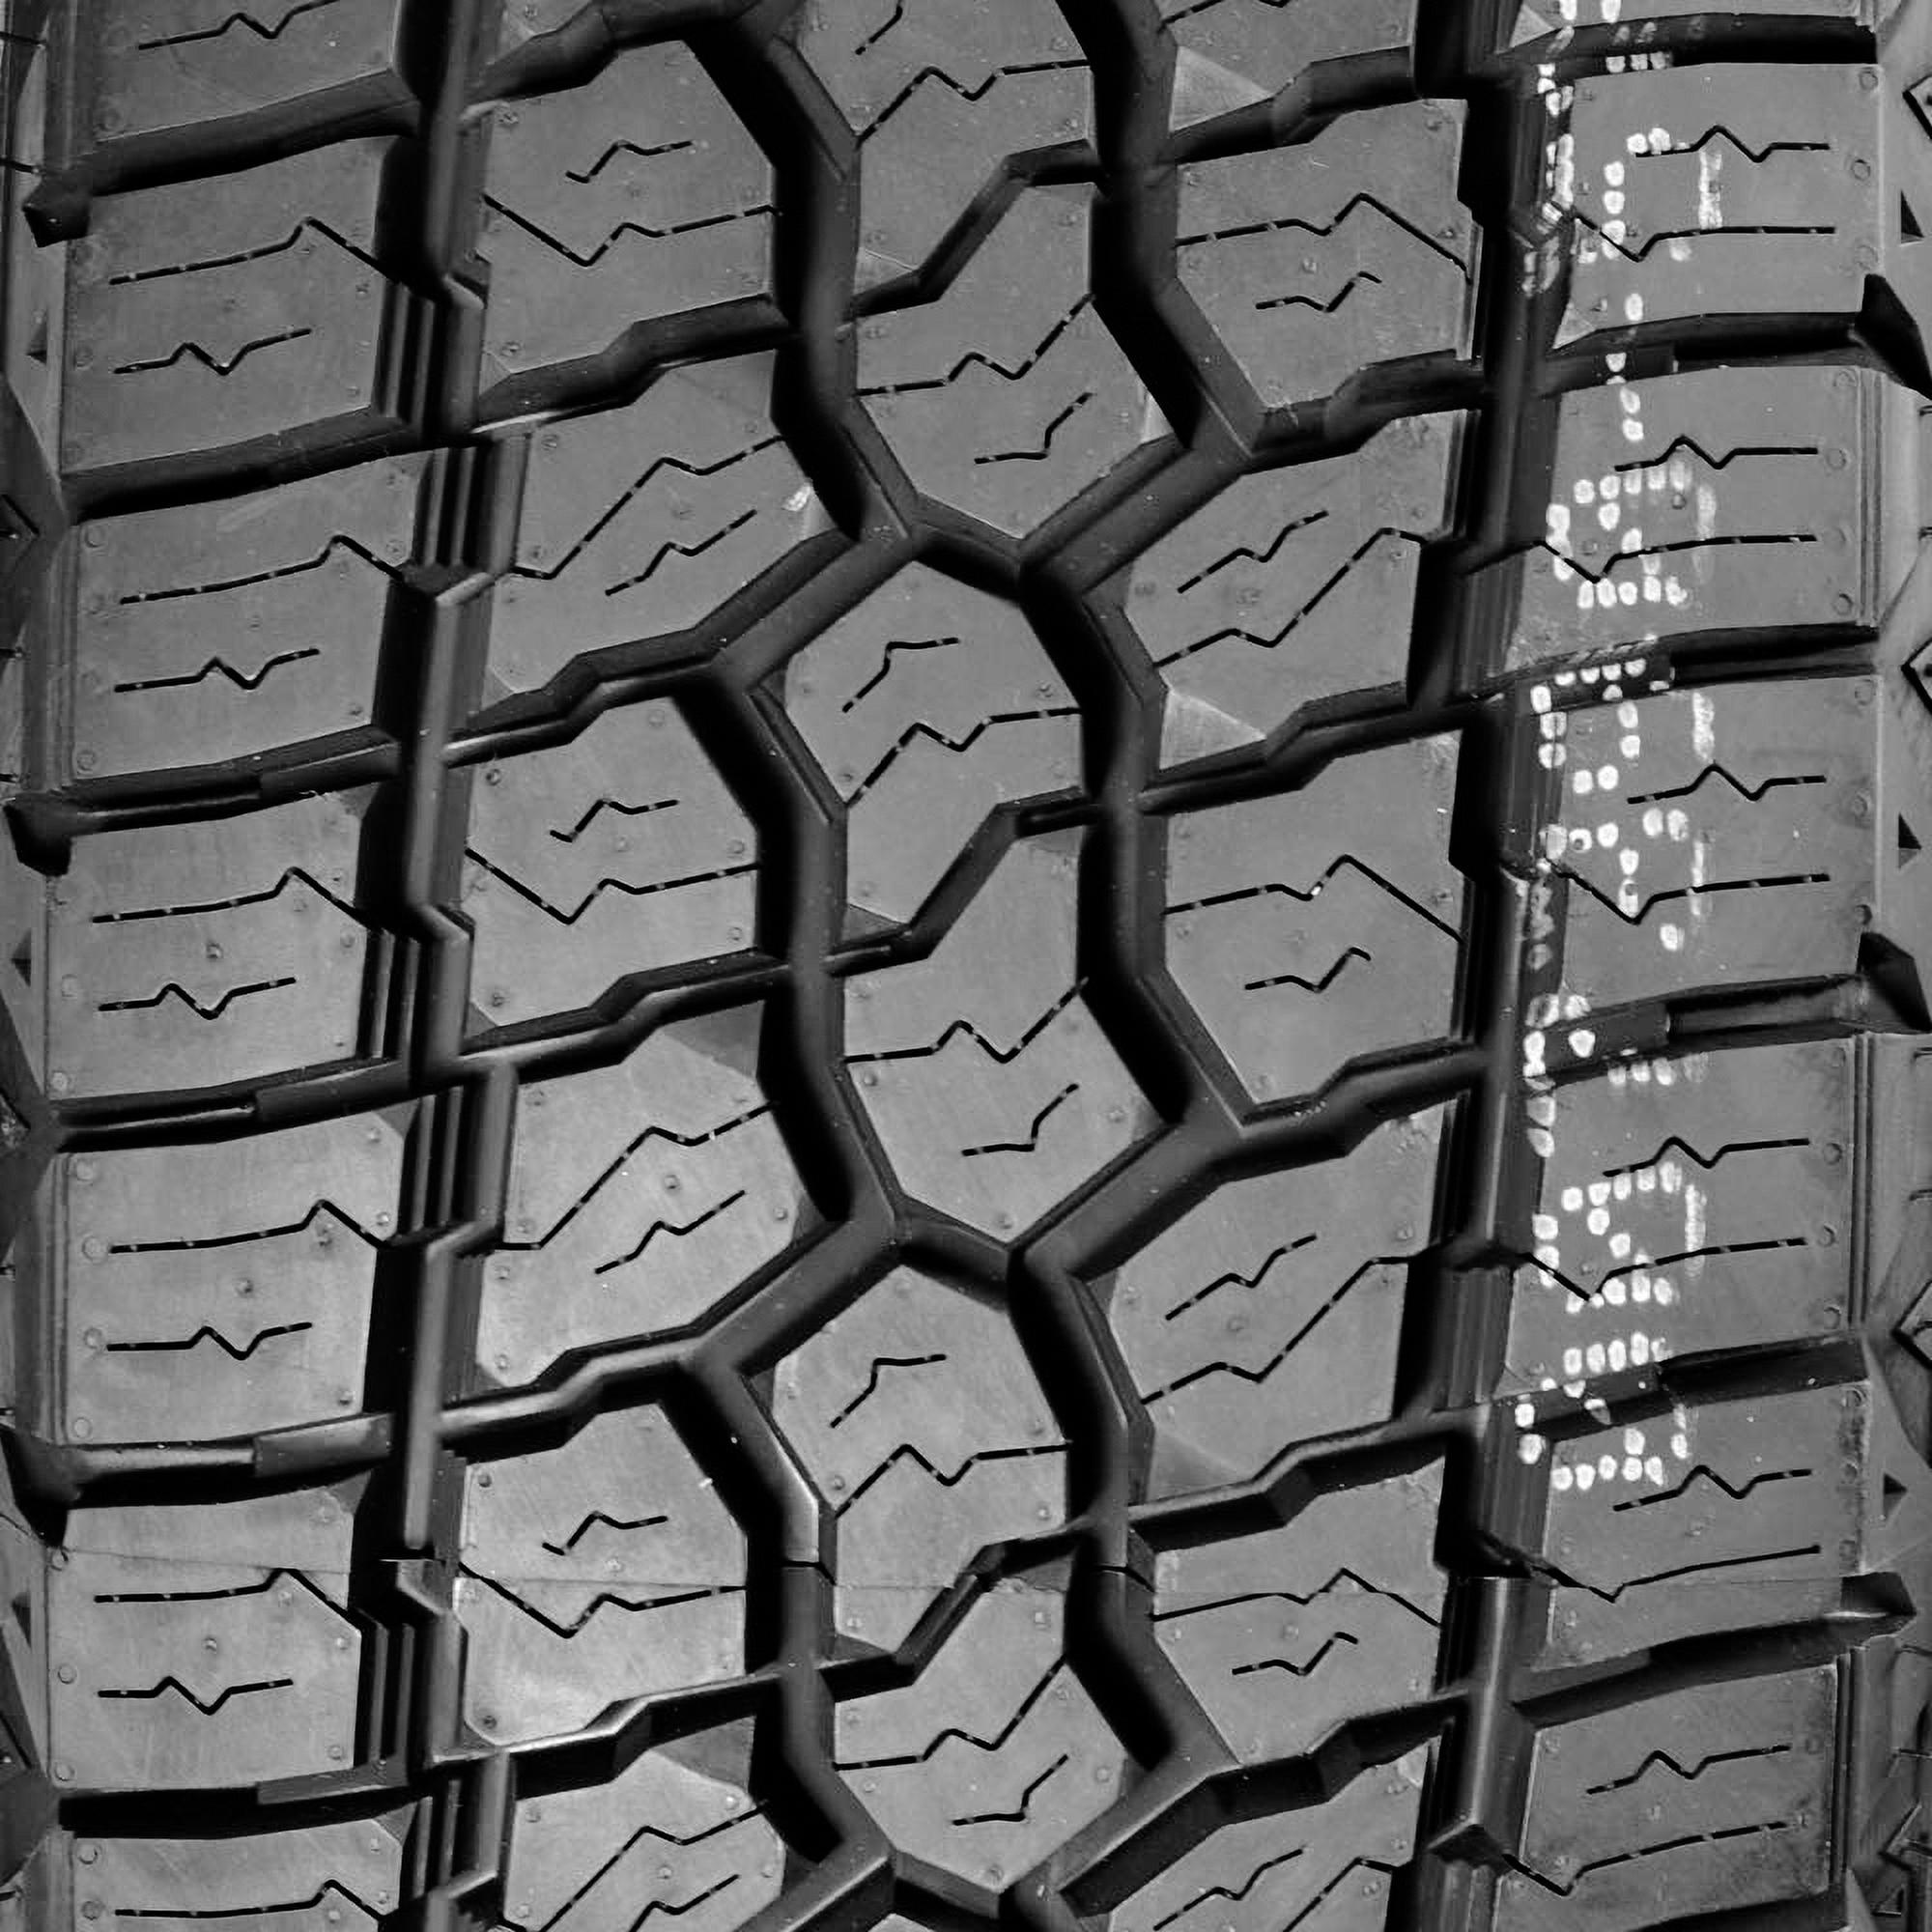 Pair of 2 (TWO) Milestar Patagonia A/T R 265/60R18 114T XL Rugged Terrain Tires Fits: 2014-15 Jeep Grand Cherokee Summit, 2017-21 Jeep Grand Cherokee Trailhawk - image 3 of 3